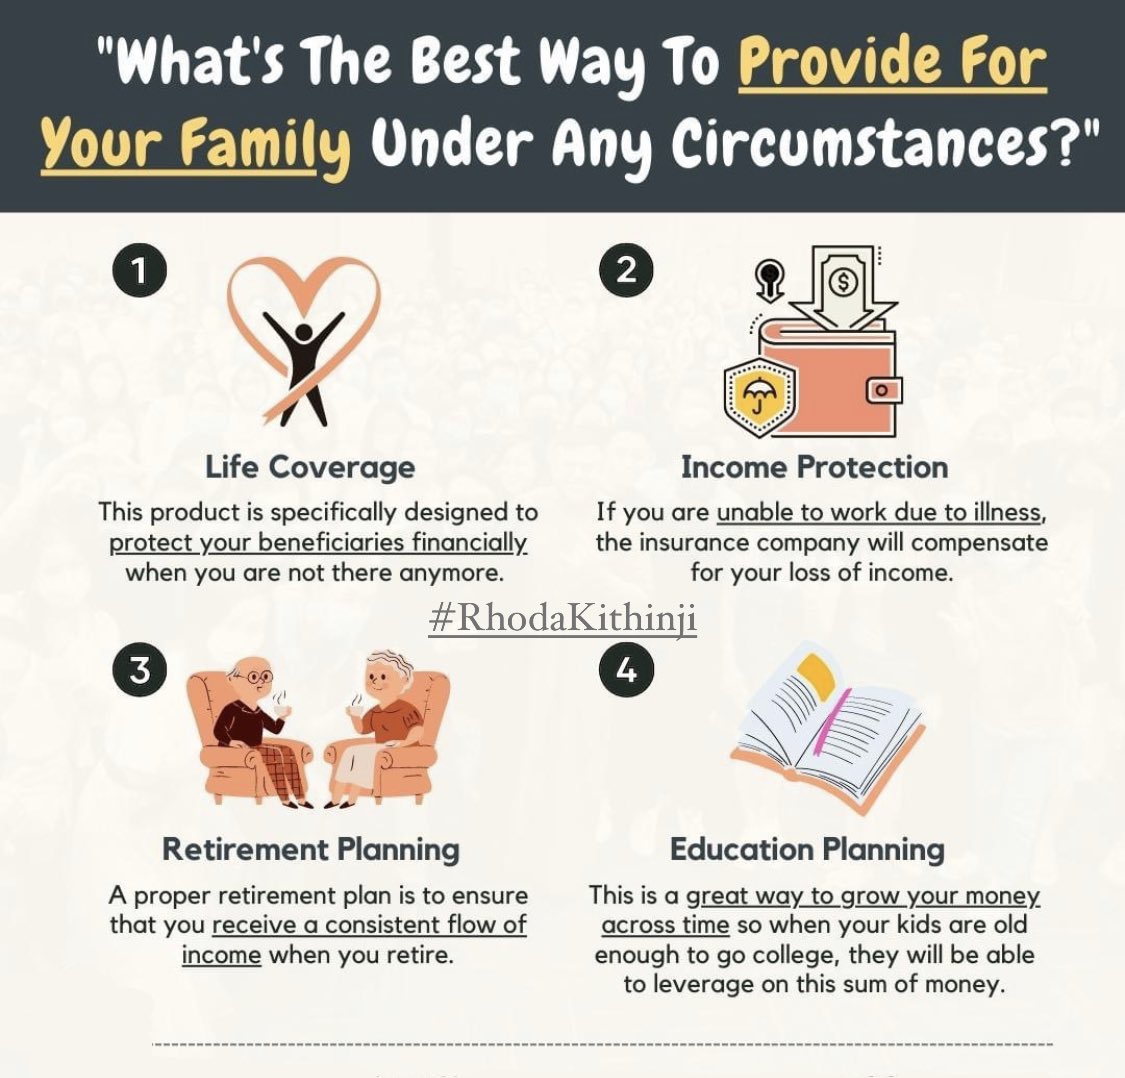 'What's The Best Way To Provide For My Family Under Any Circumstances?' 
#finance #RhodaKithinji #financetips #financialfreedom #financialplanning #financialeducation #financialindependence #financialgoals #wealth #finances #investments #insurance #incomeprotection #retirement